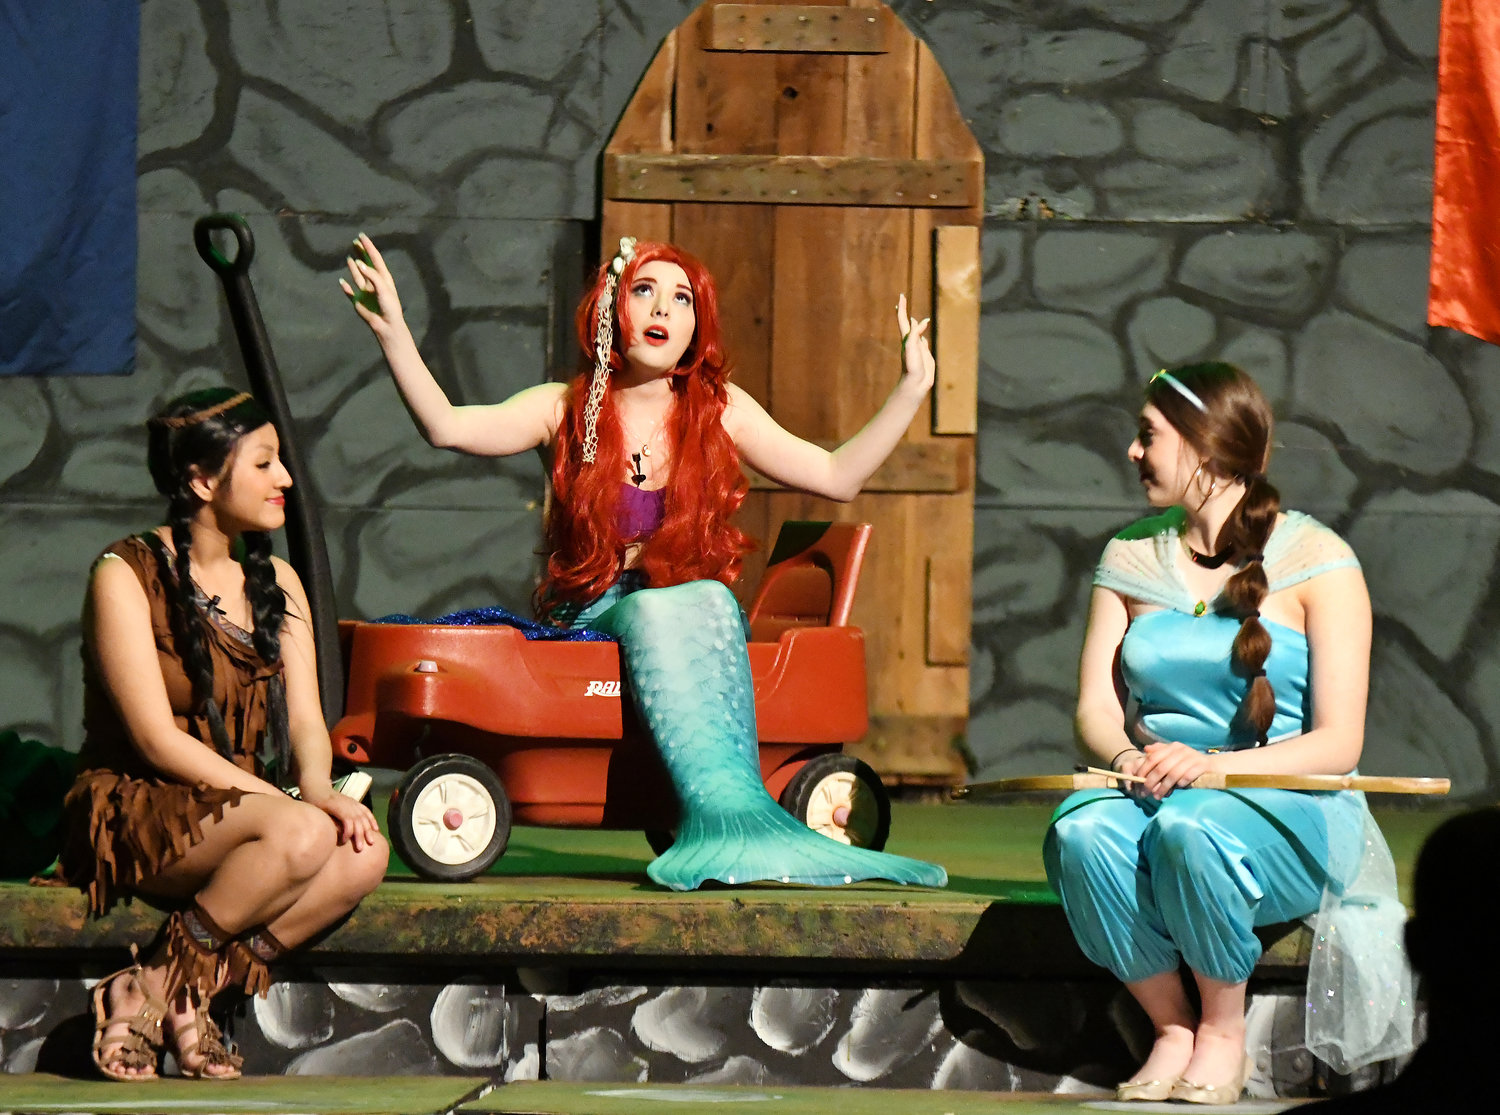 Alexia Alexander (The Little Mermaid, center) sings as Marina Kitchell (Indian Princess) and MaKenzy Pigg (Princess from Aladin) listen.